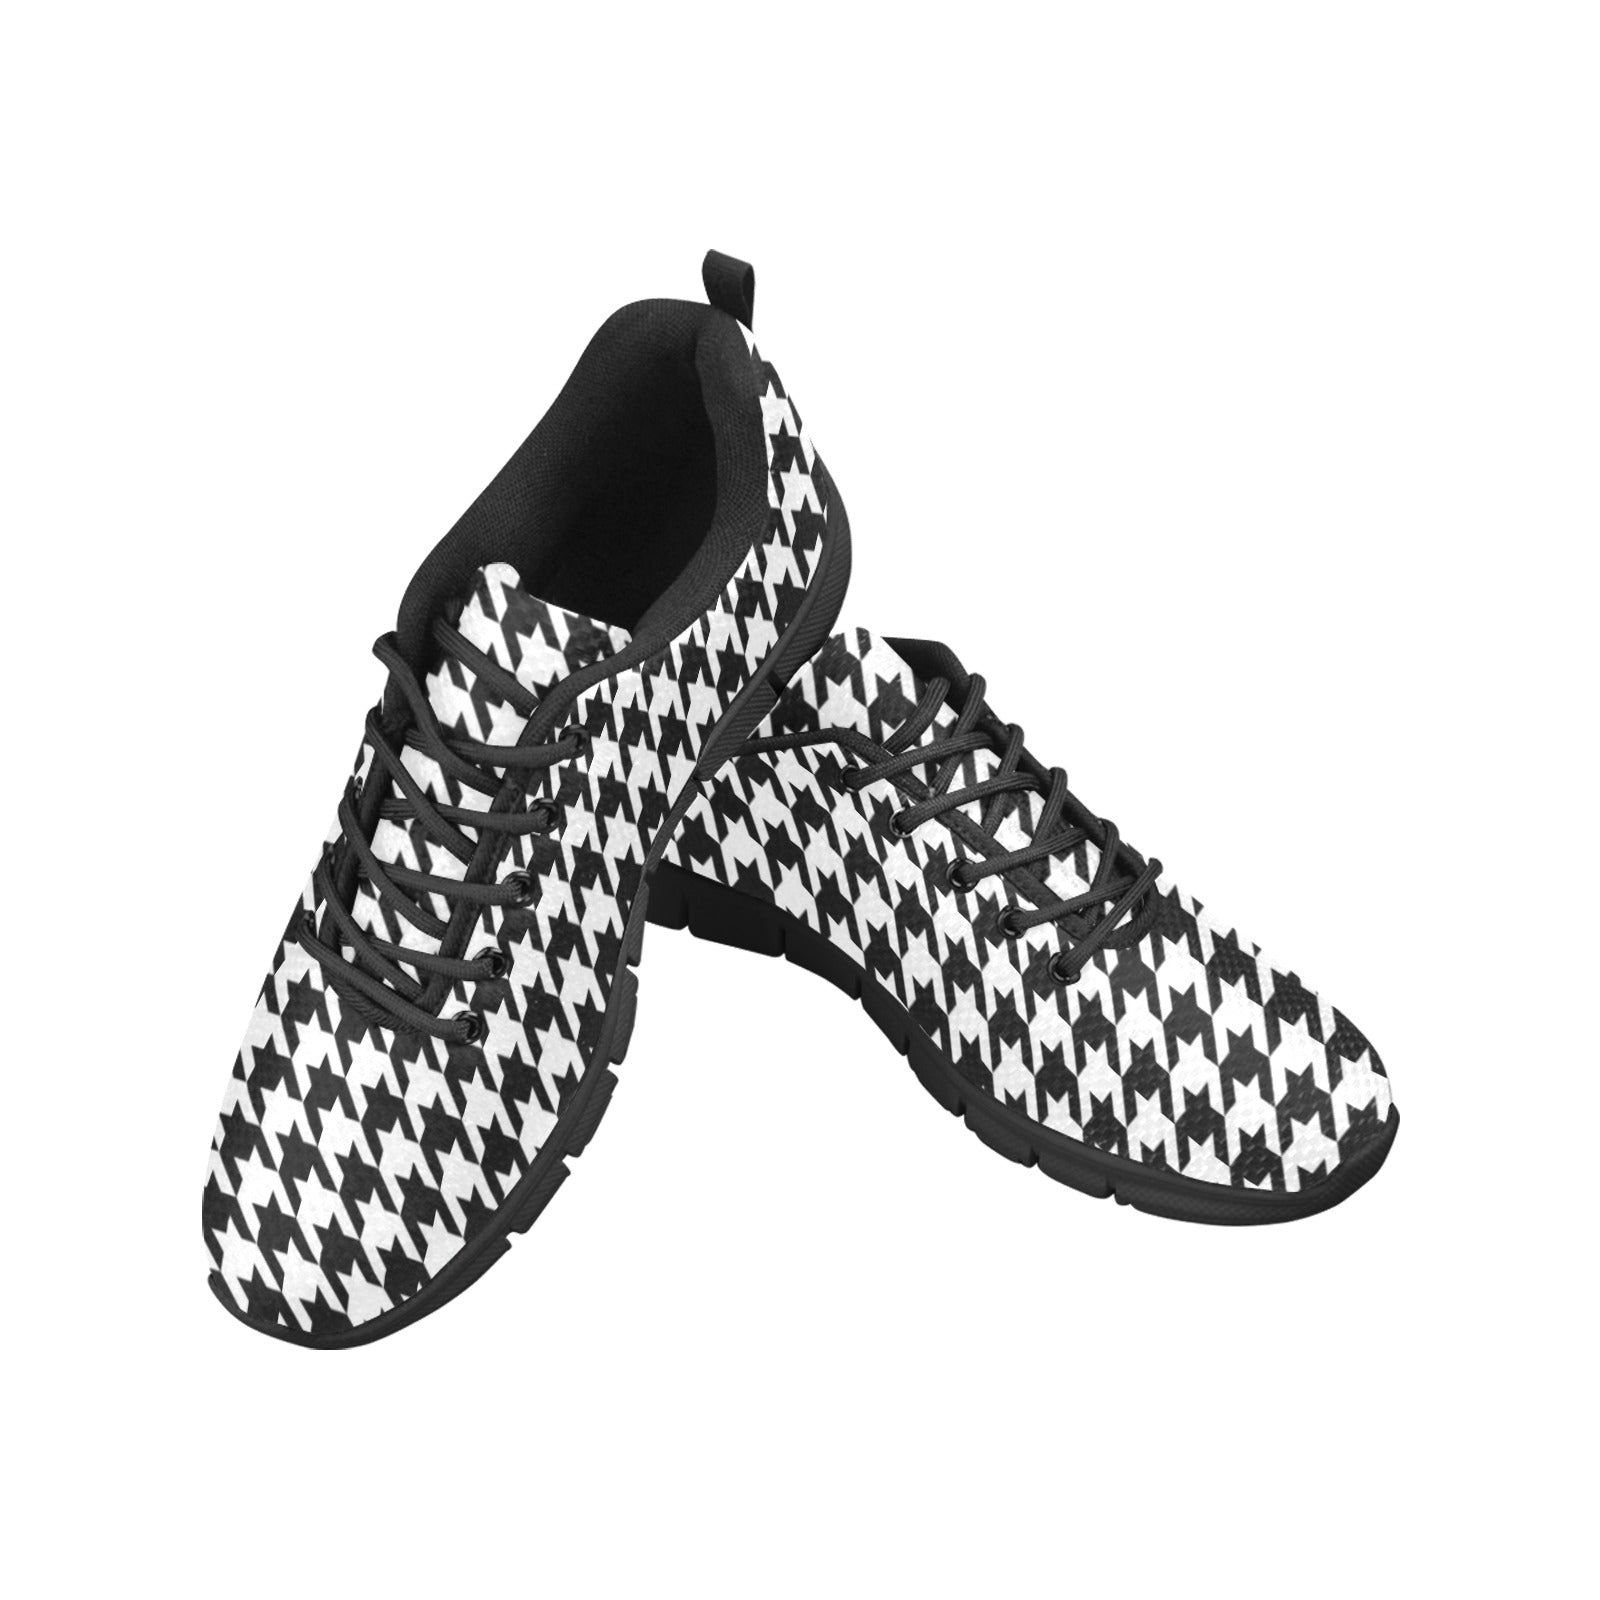 Houndstooth Men Breathable Sneakers, Black White Pattern Print Lace Up Running Custom Designer Casual Mesh Large Size Shoes Starcove Fashion